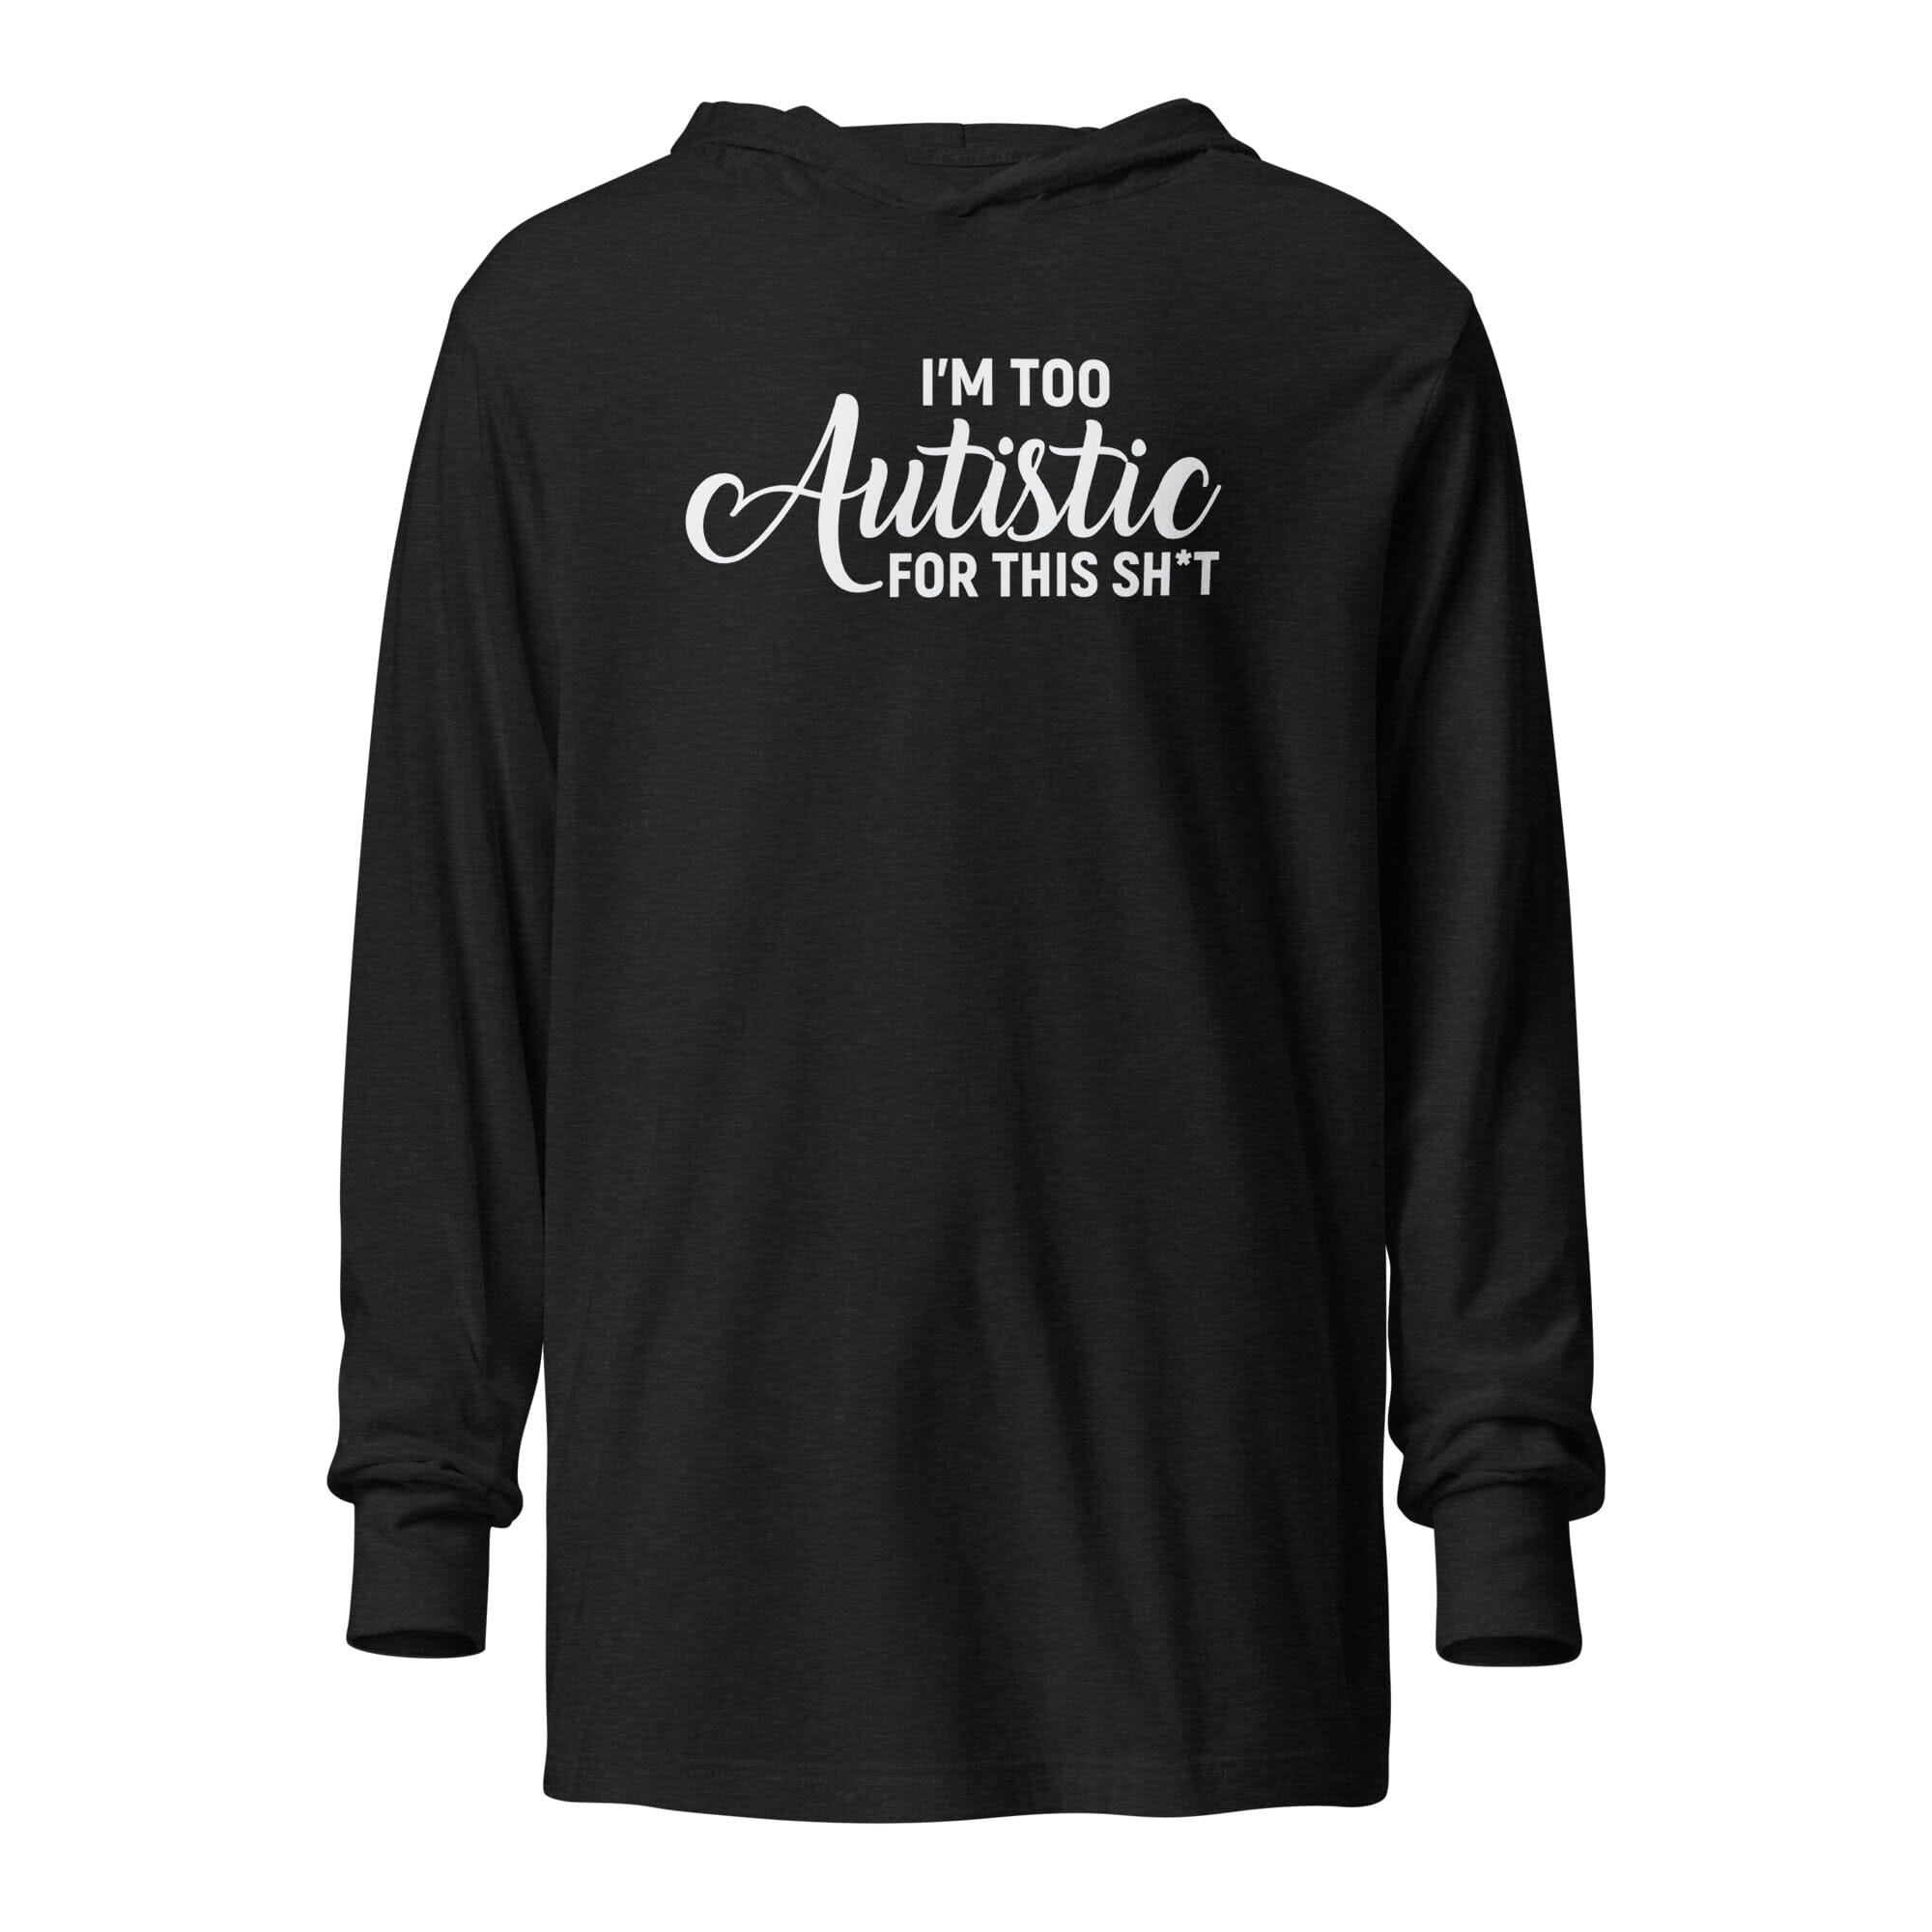 I'm Too Autistic for This Sh*t Hooded long-sleeve tee The Autistic Innovator Charcoal-Black Triblend XS 